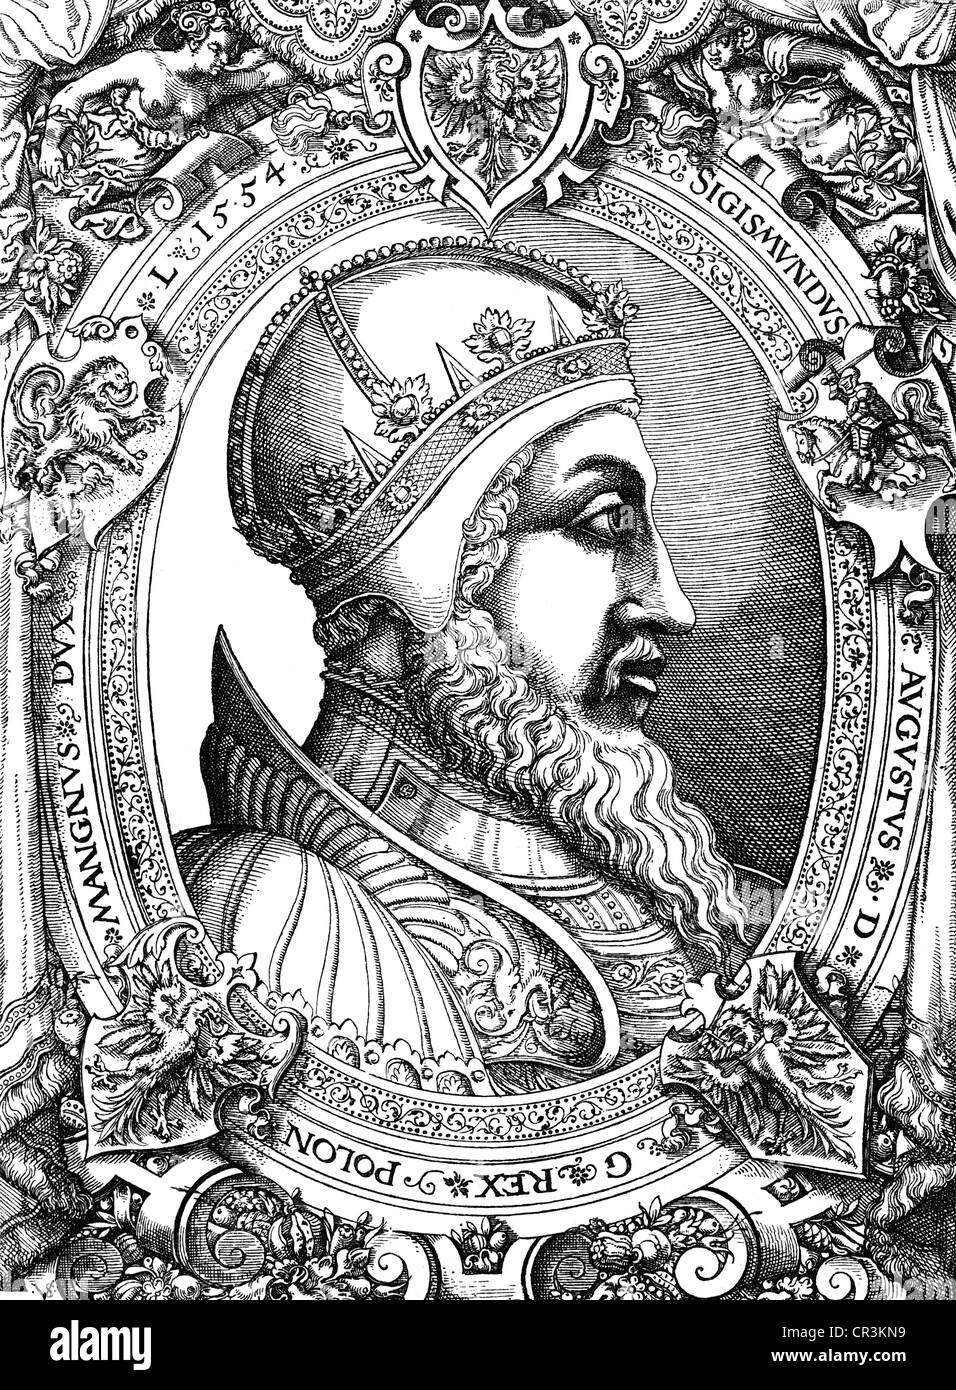 Sigismund II August, 1.8.1520 - 14.7.1572, King of Poland 1.4.1548 - 14.7.1572, portrait, copper engraving by Virgil Solis, 1545, Artist's Copyright has not to be cleared Stock Photo